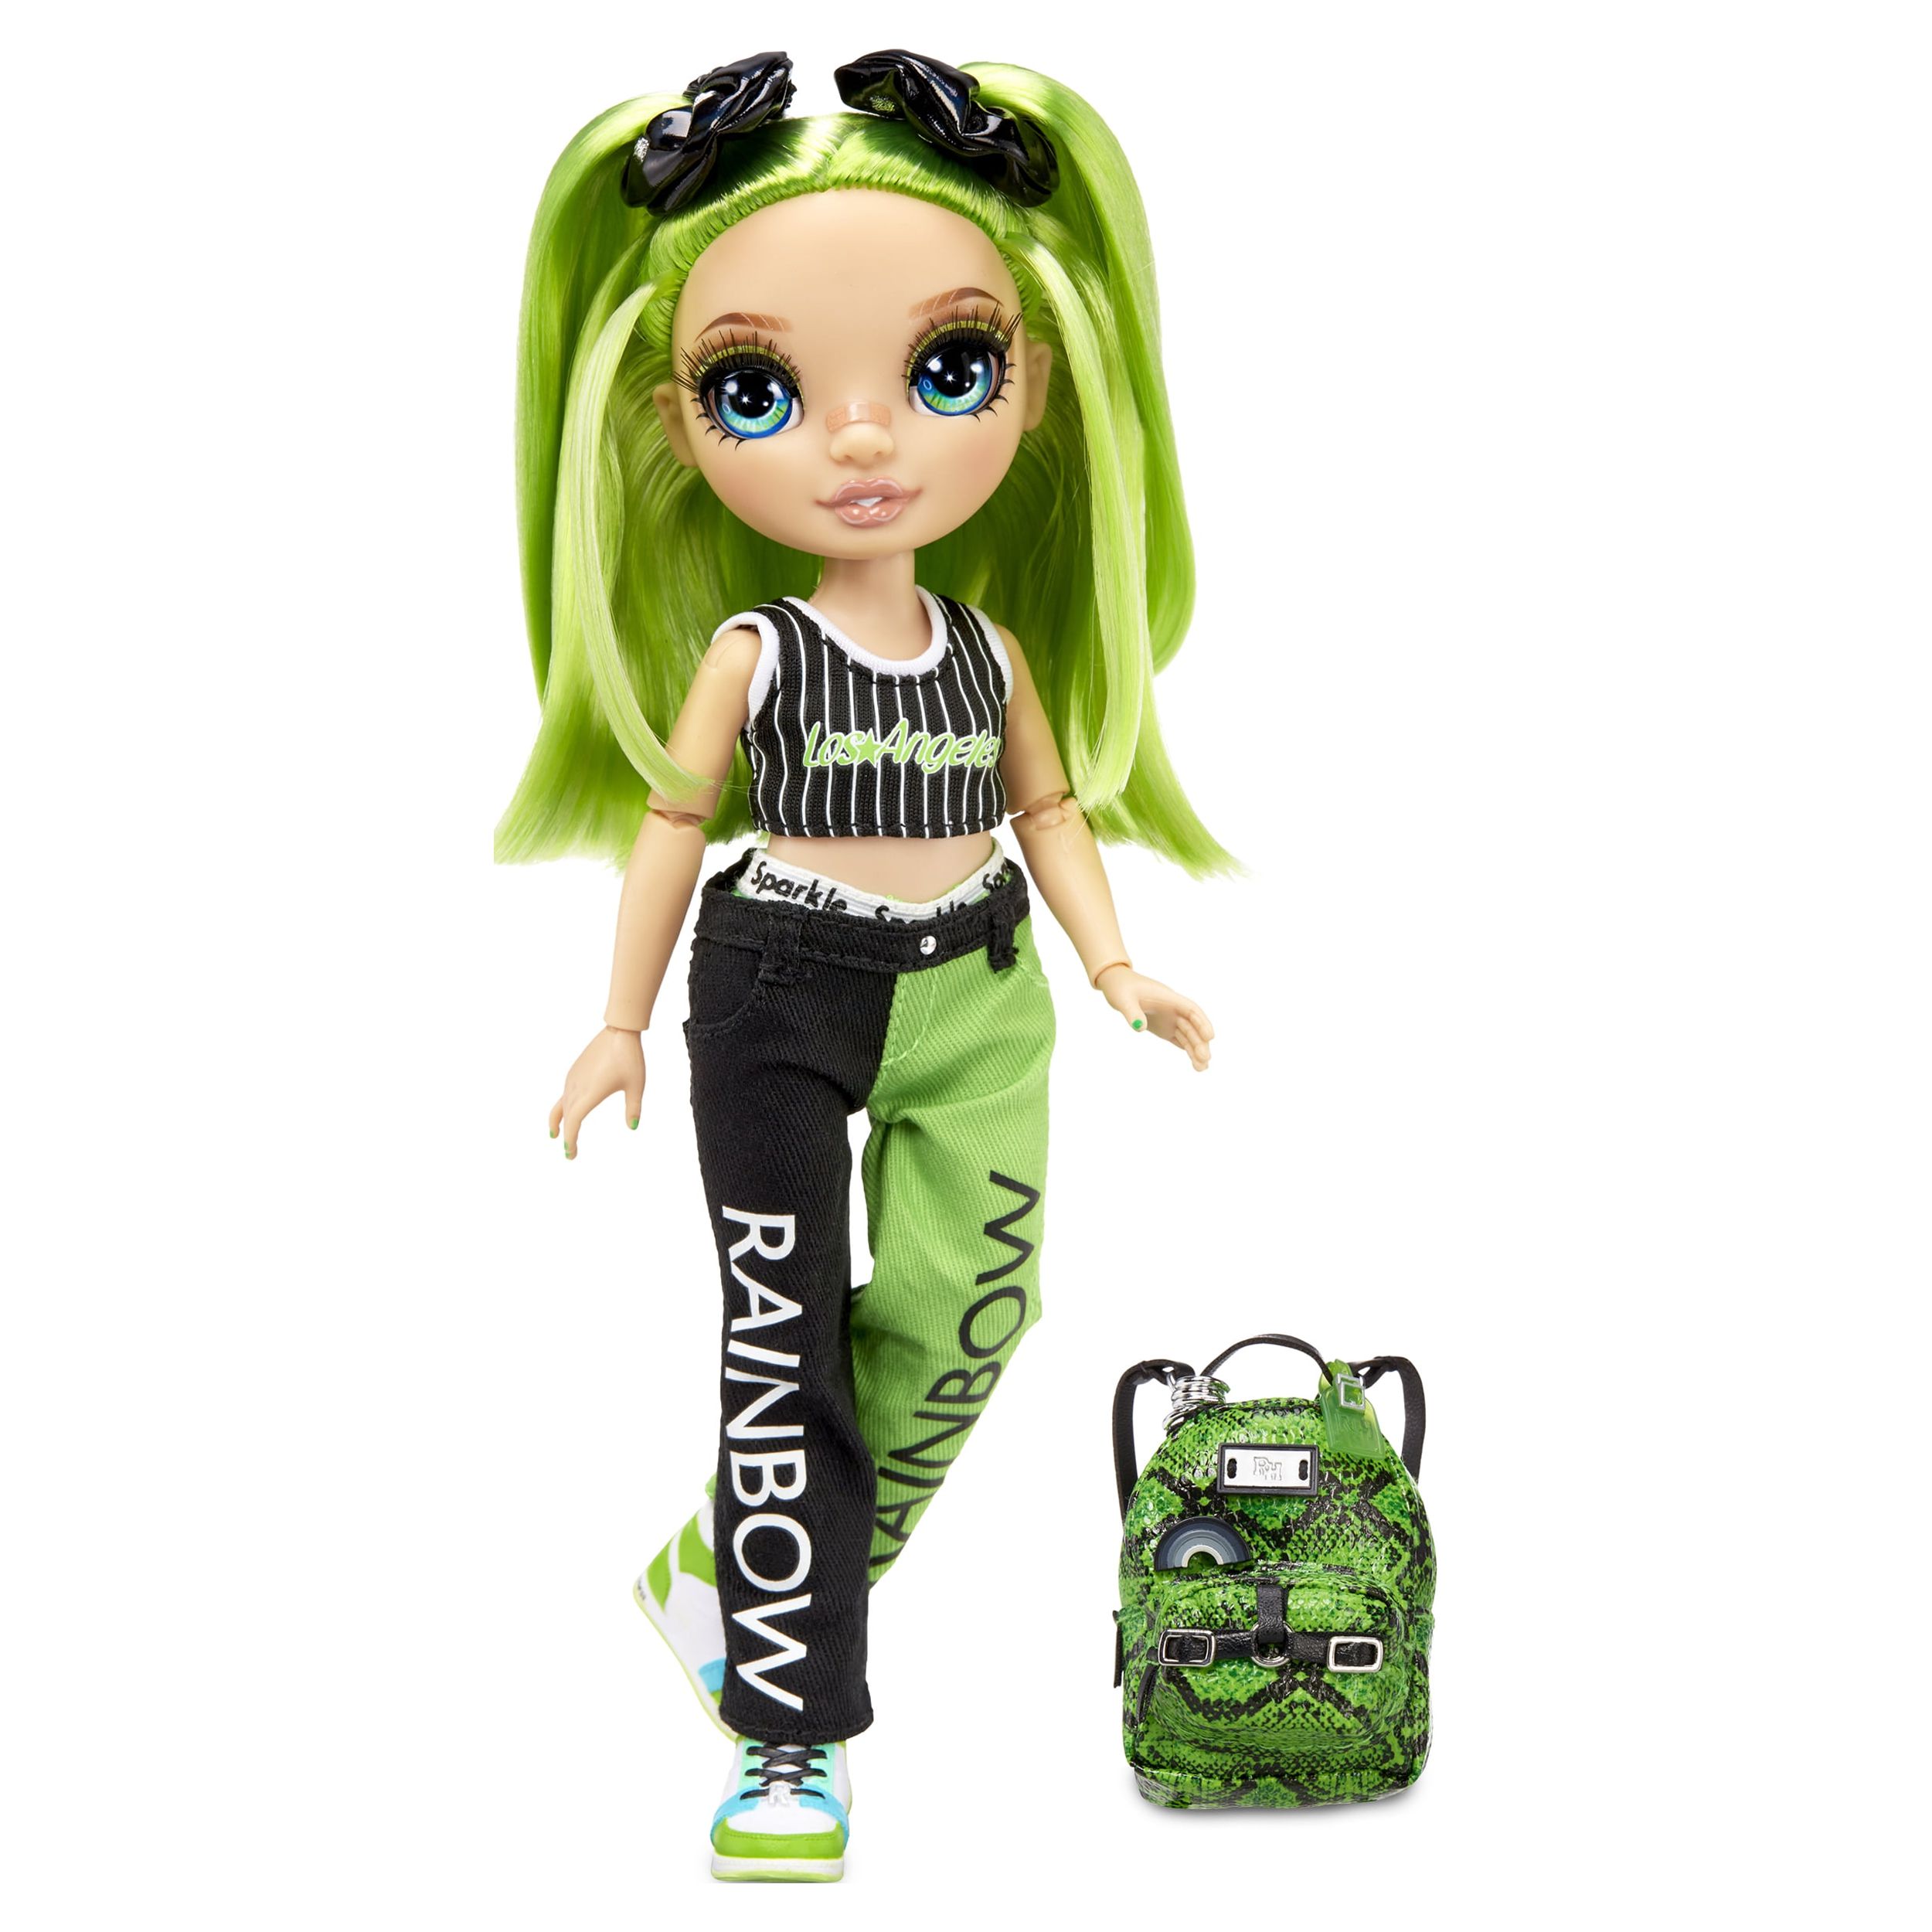 Rainbow High Exclusive with 5 Jr High Fashion Doll Favorites Ages 4 & up - image 5 of 10